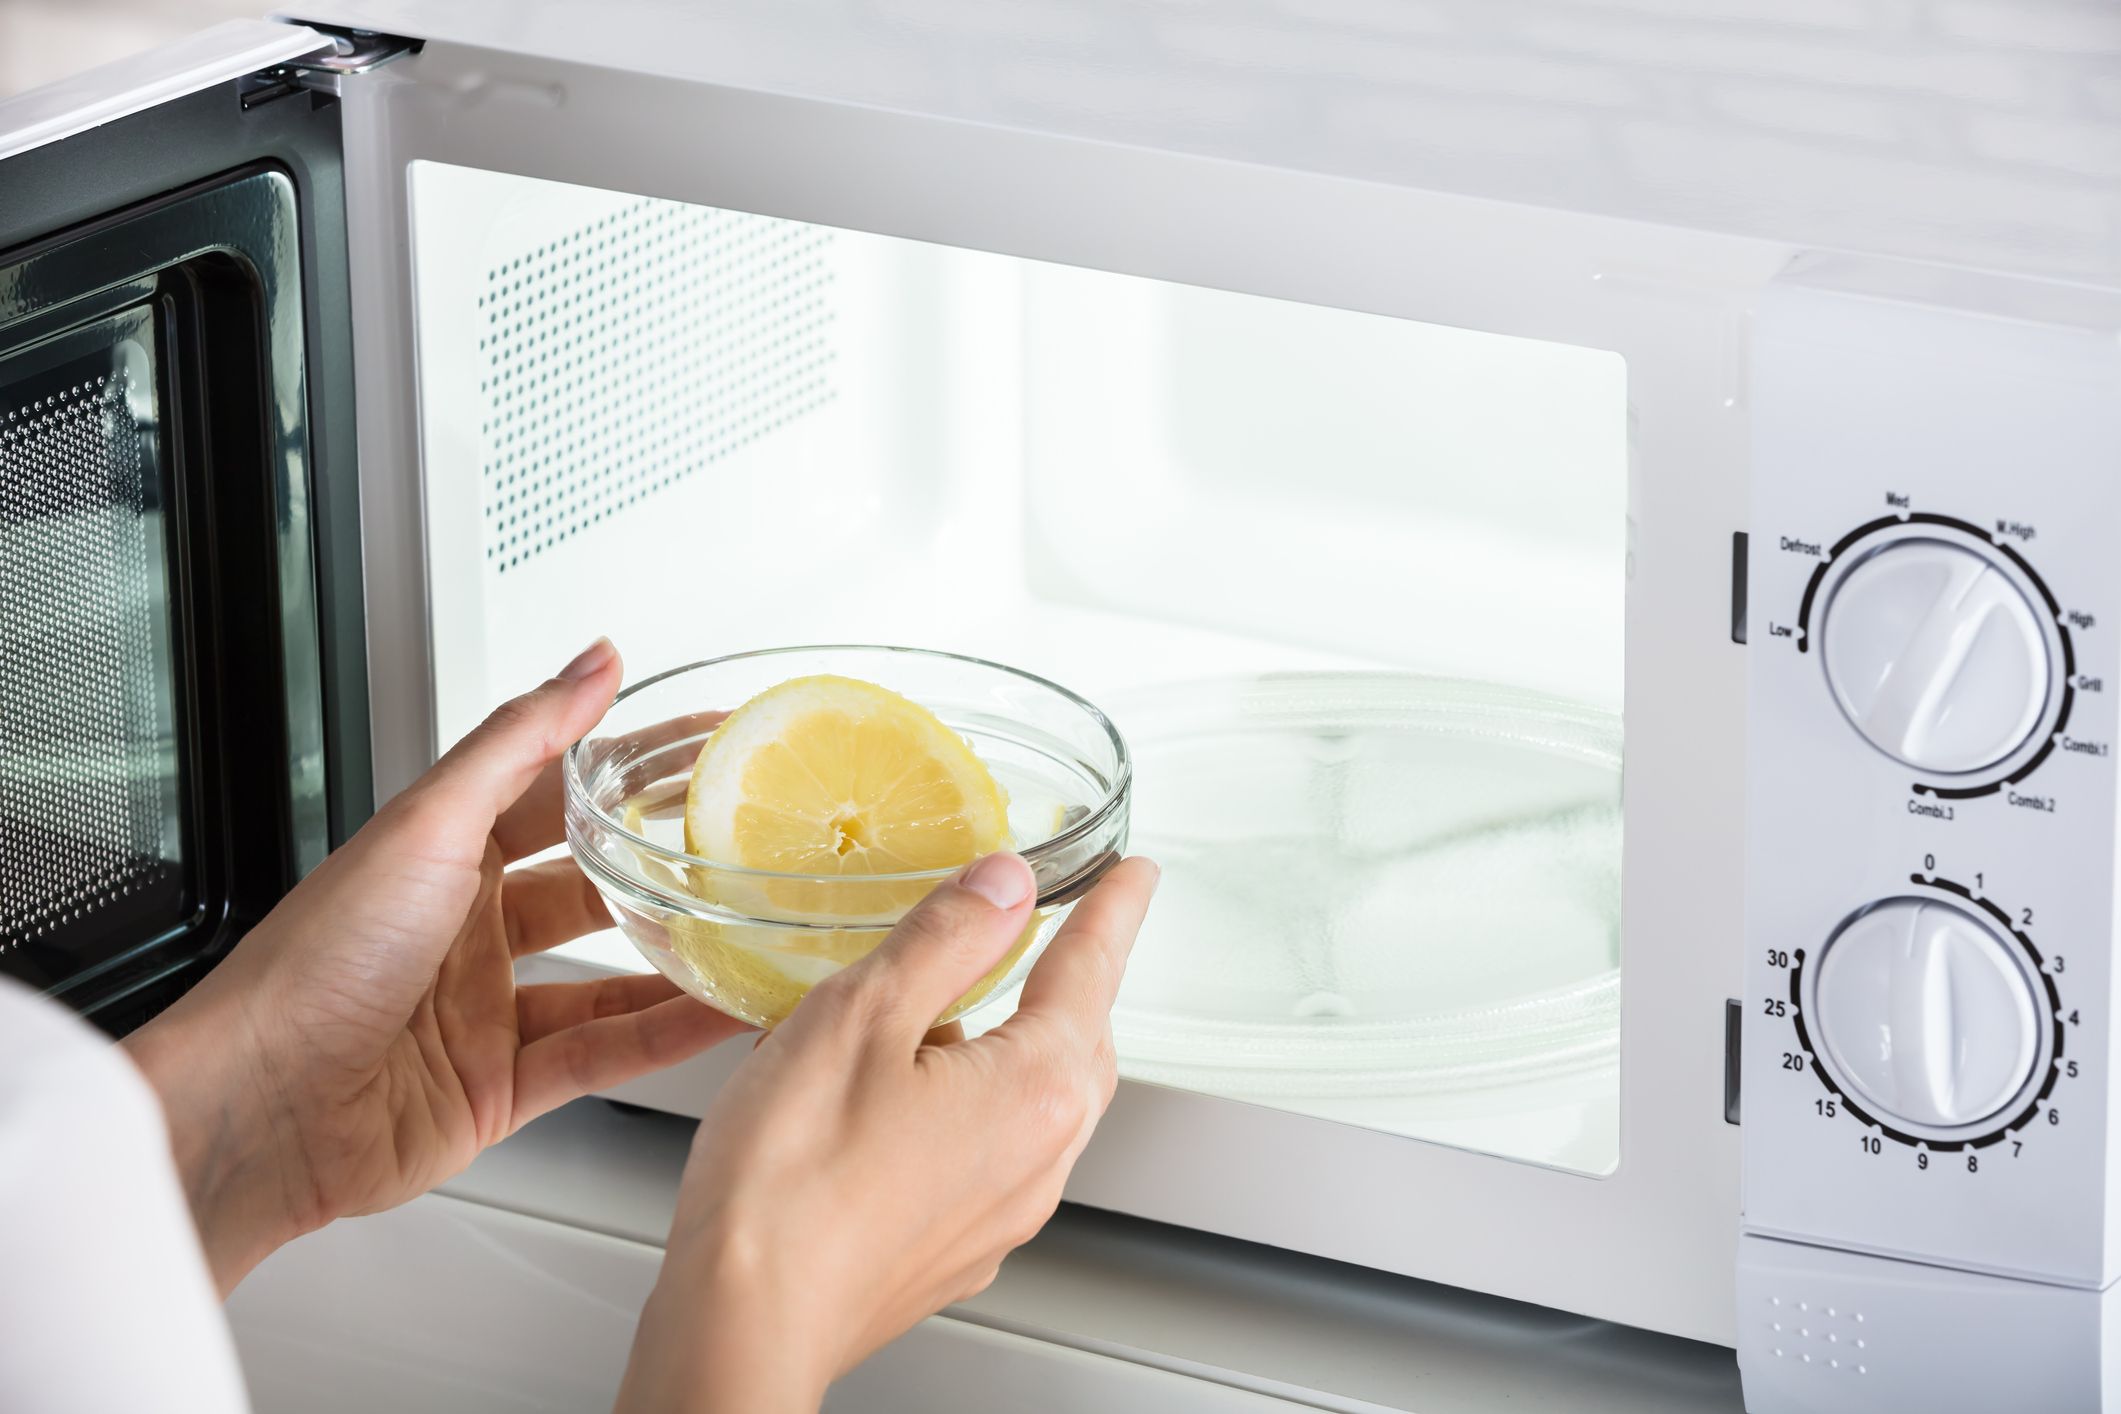 https://www.dialanangelperth.com.au/wp-content/uploads/2020/08/woman-putting-bowl-of-slice-lemon-in-microwave-oven-royalty-free-image-1578044356.jpg